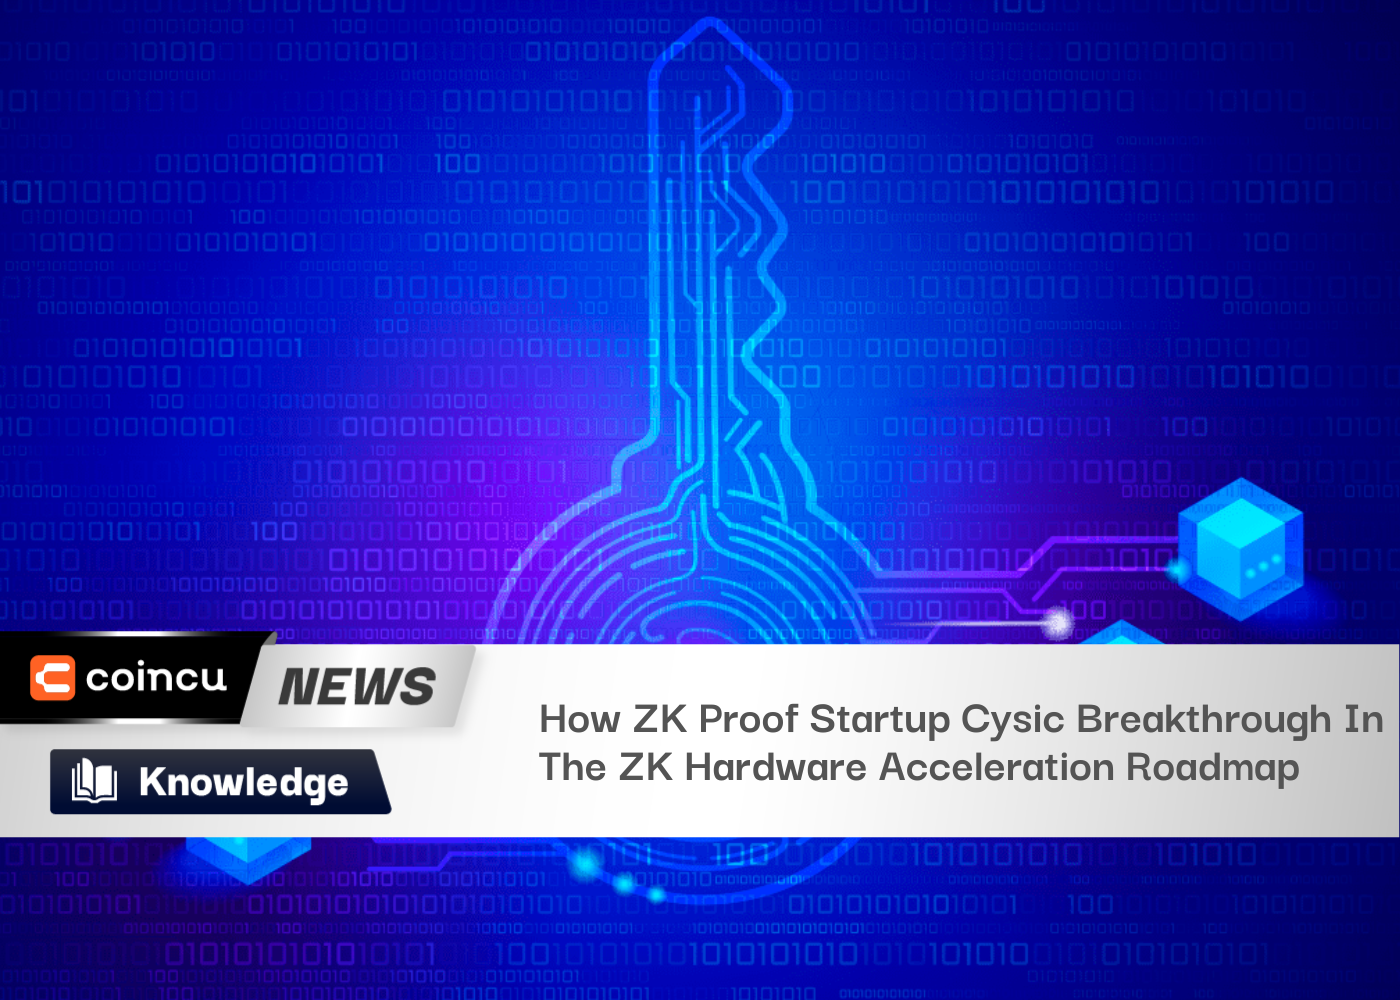 How ZK Proof Startup Cysic Breakthrough In The ZK Hardware Acceleration Roadmap